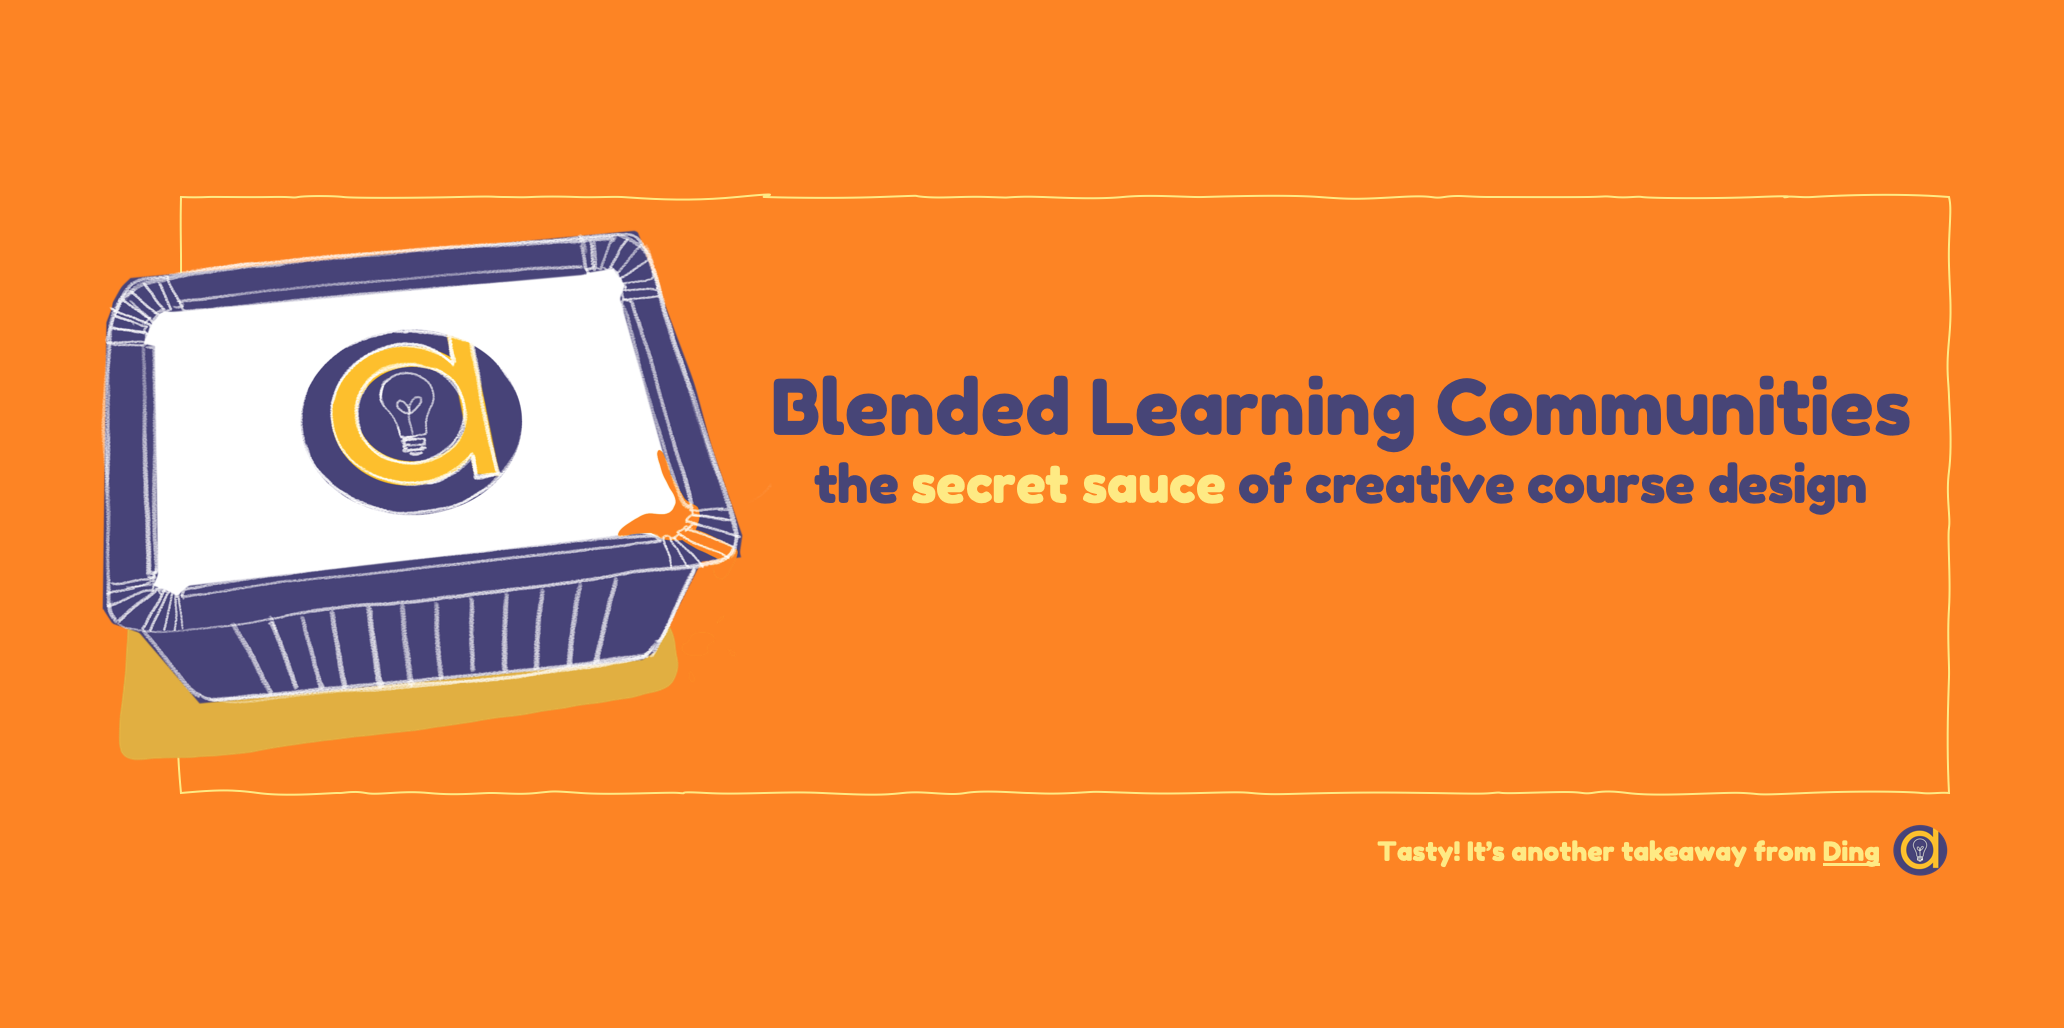 Ding Guide to Blended Learning Communities